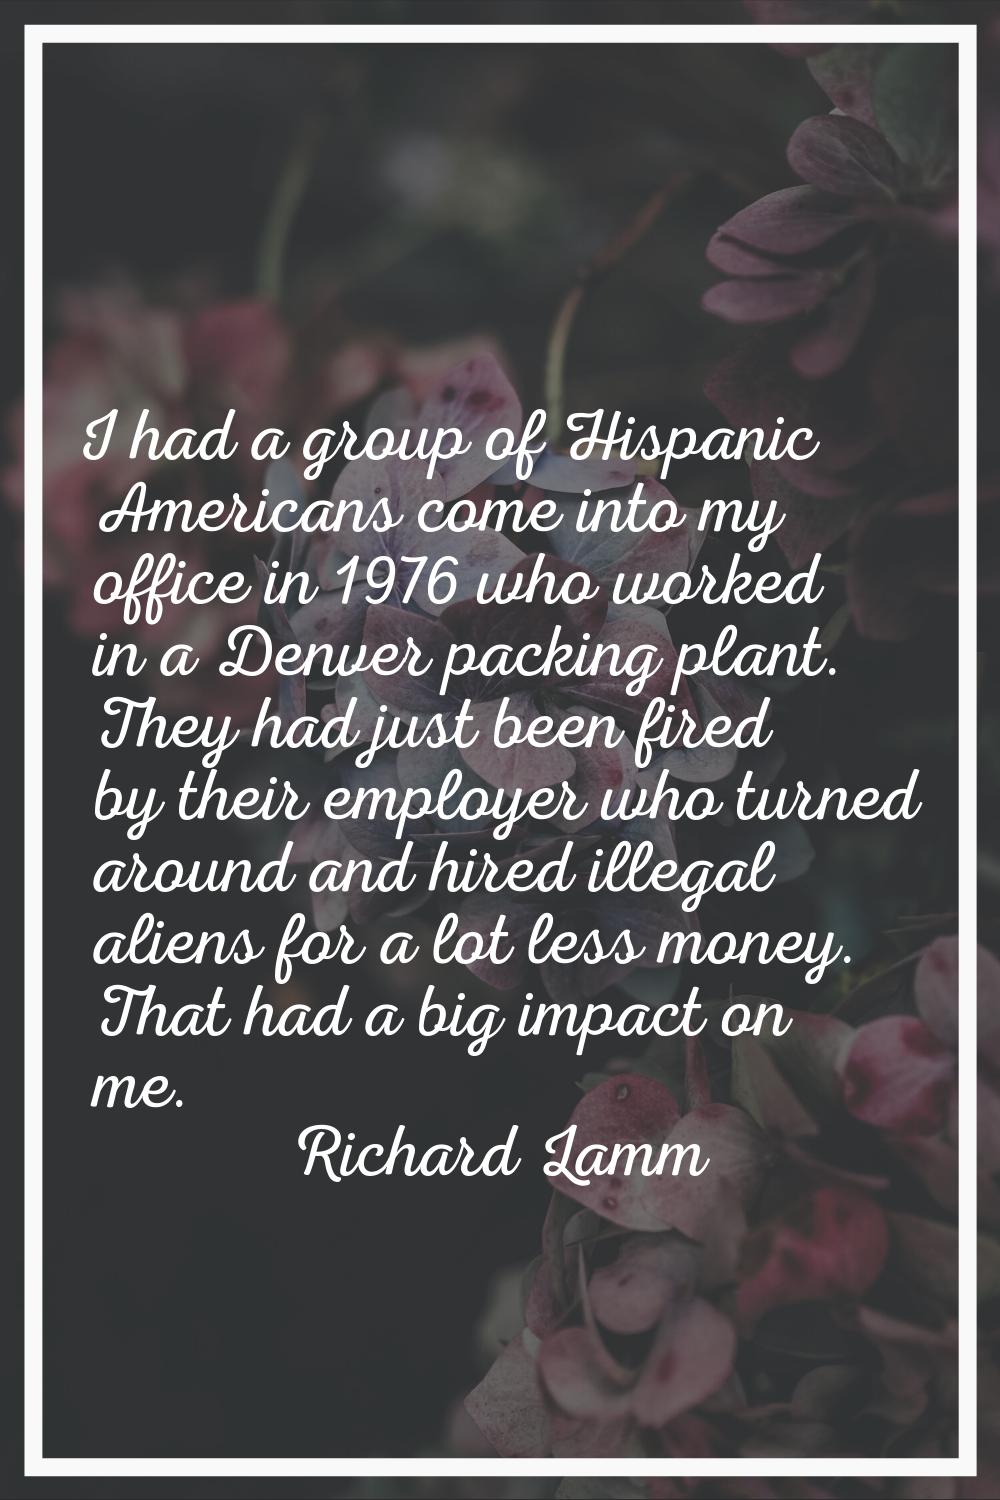 I had a group of Hispanic Americans come into my office in 1976 who worked in a Denver packing plan